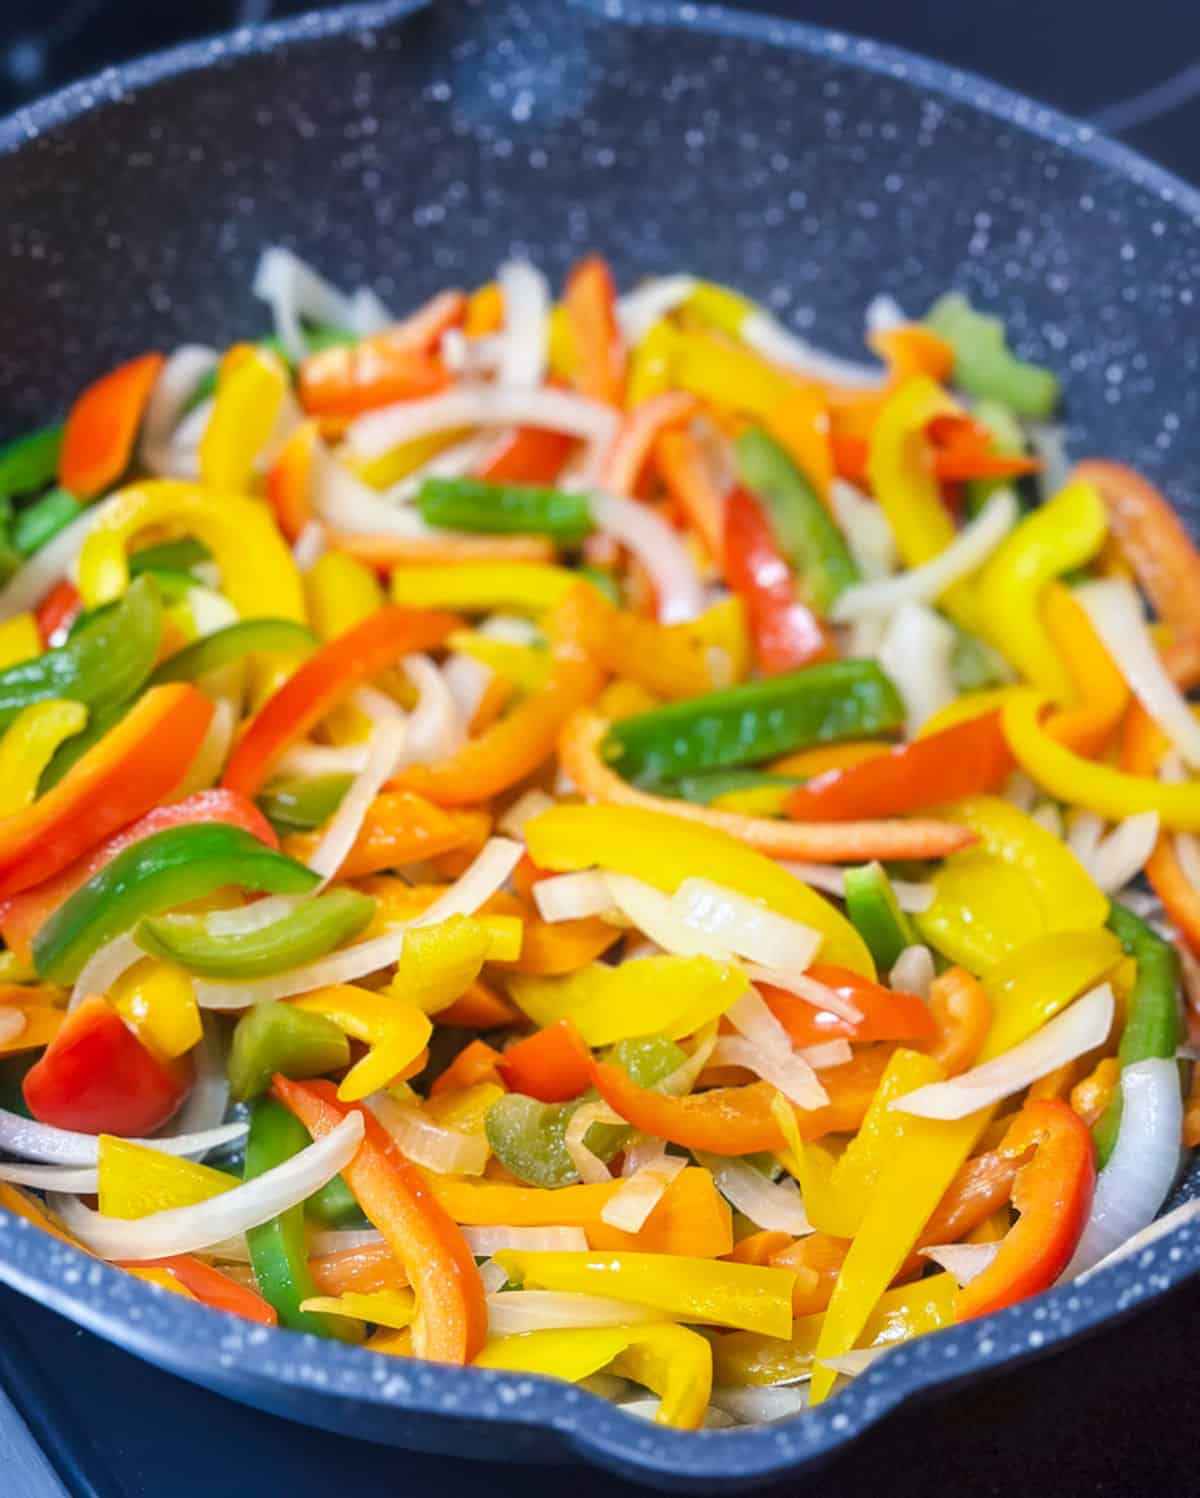 slices of colorful peppers and white onions are sauteeing in a speckled grey skillet on a black top stove.